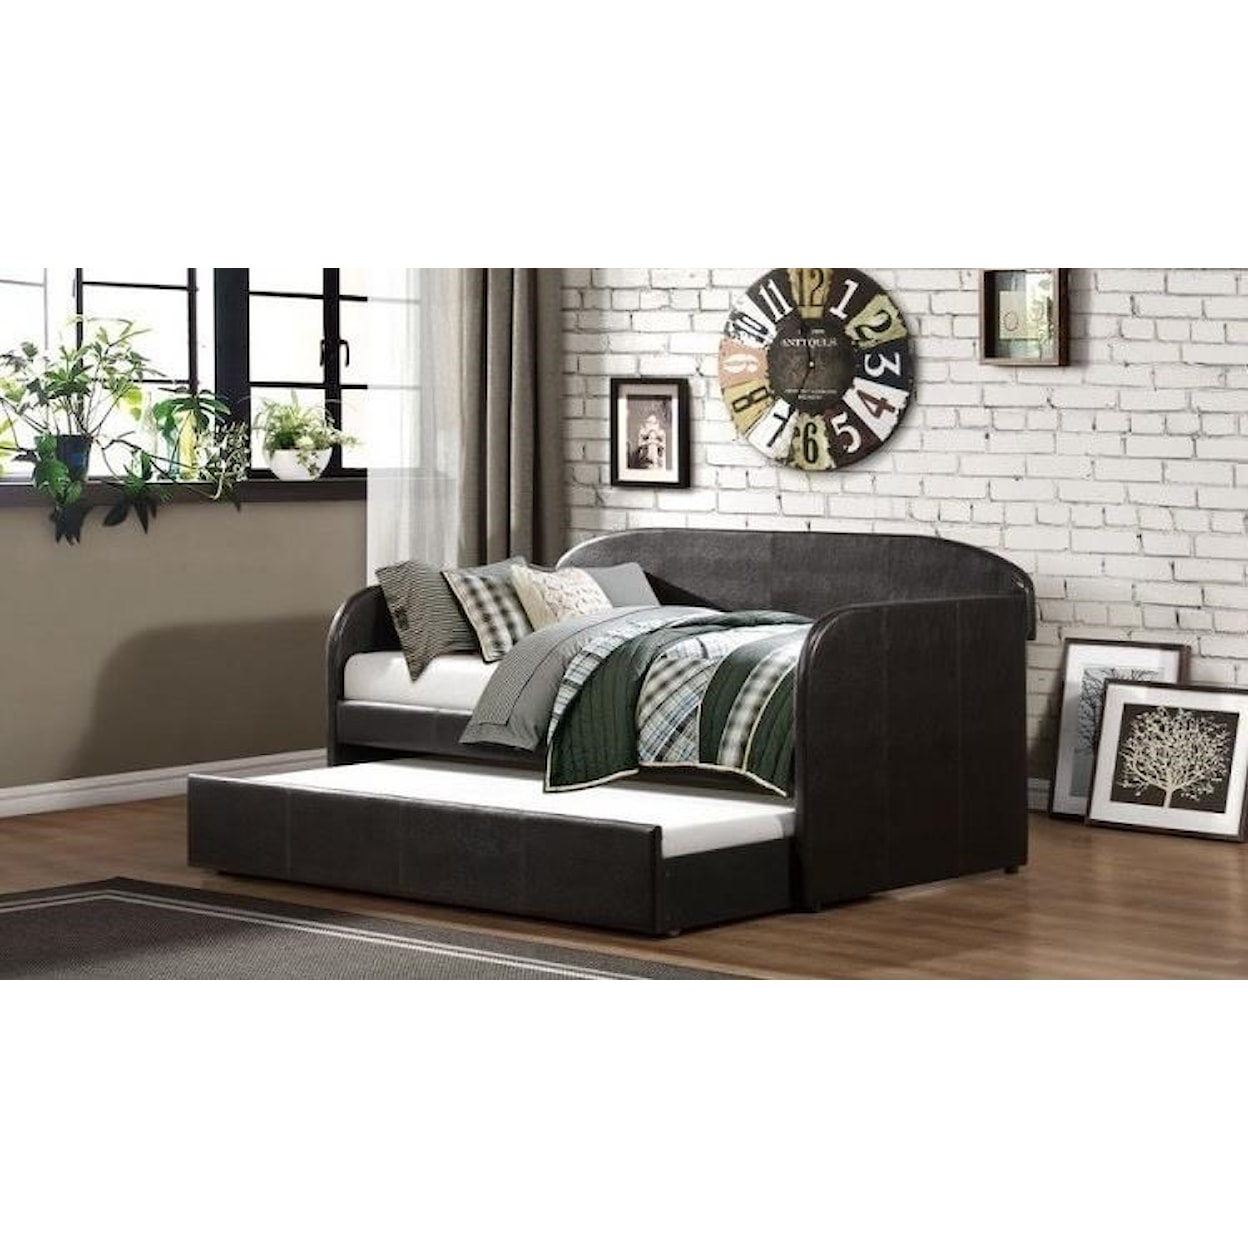 Homelegance Furniture Daybeds Roland Daybed with Trundle